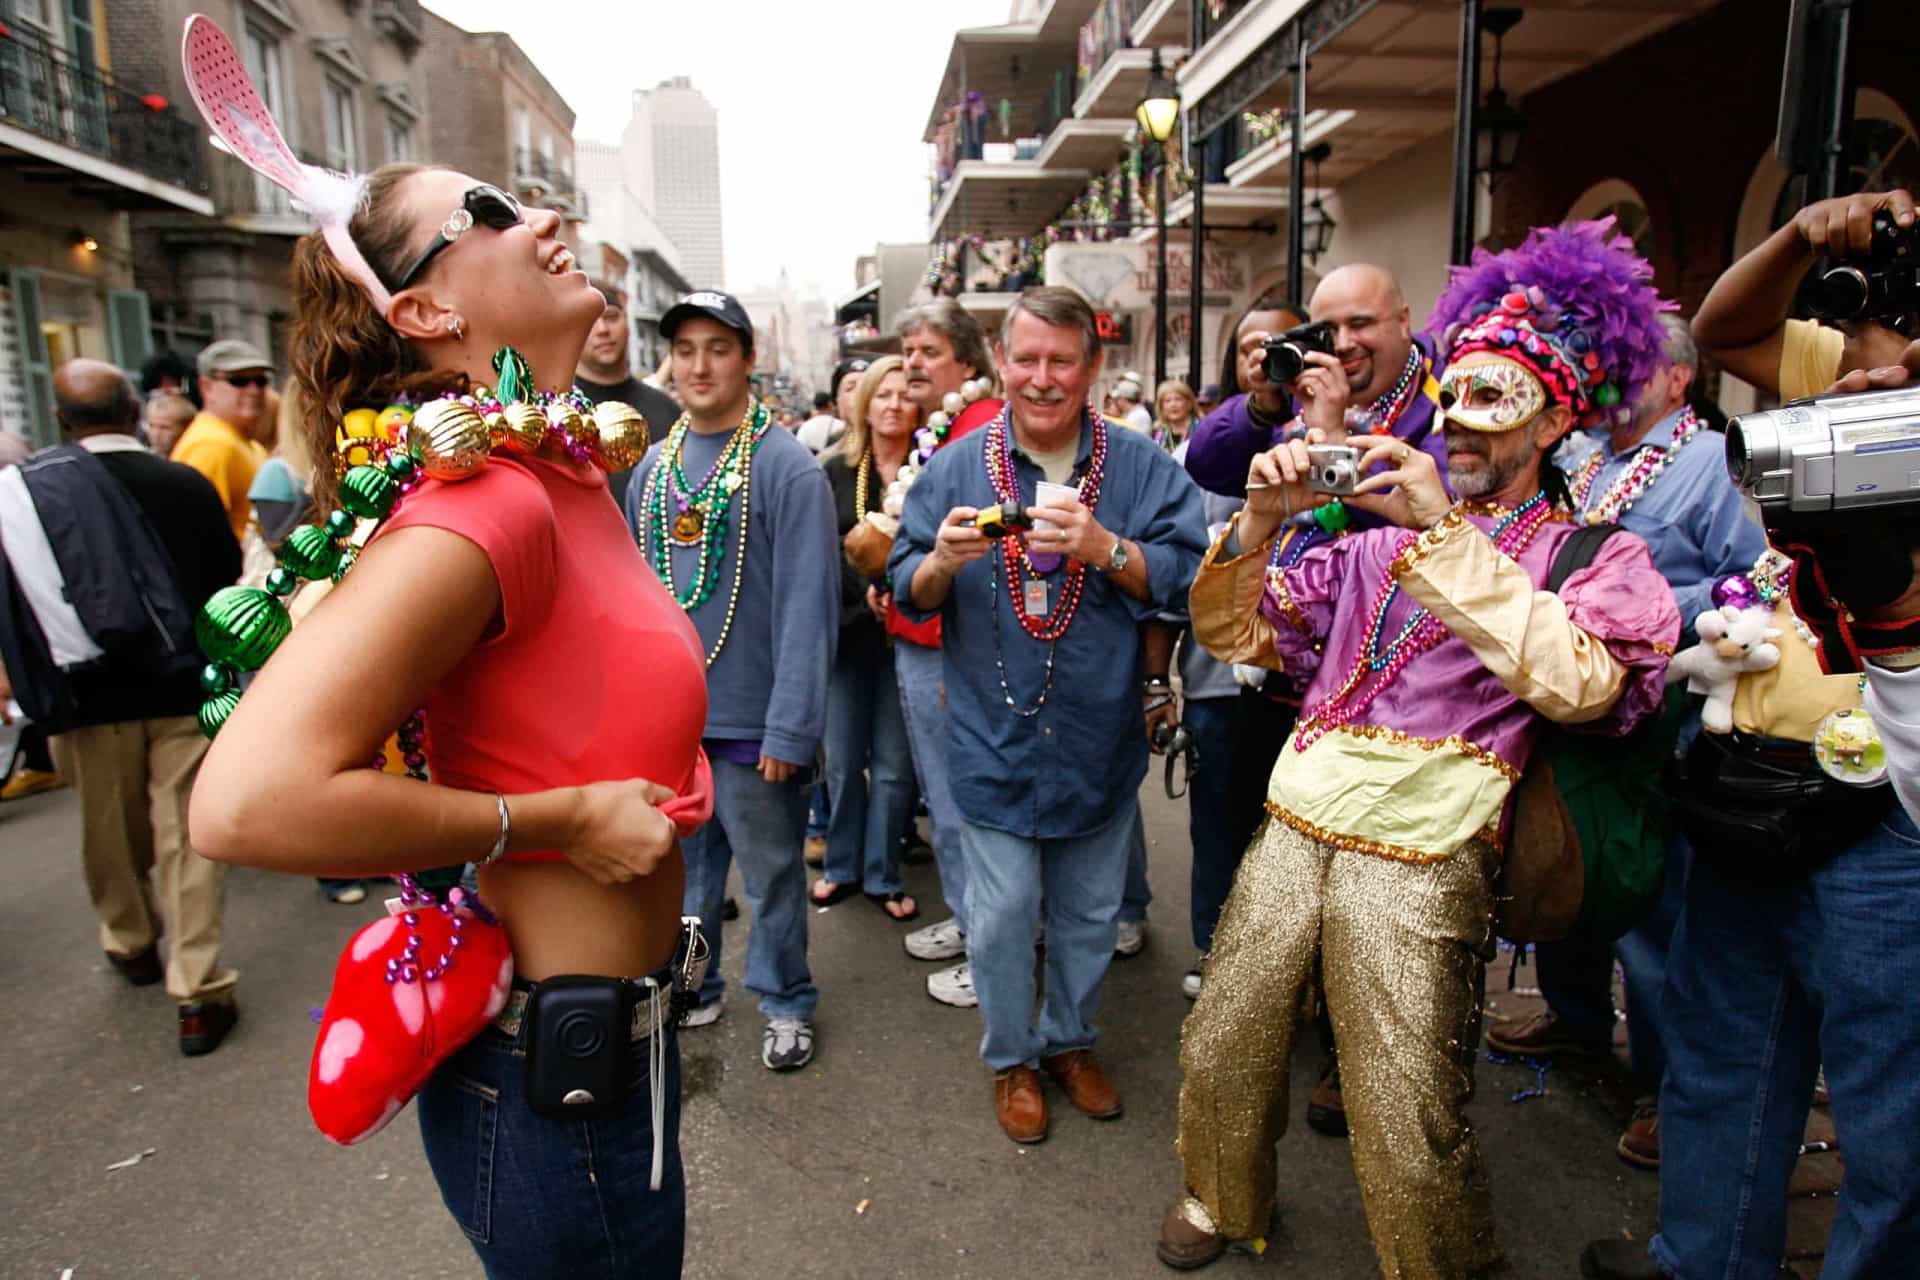 <p>Mardi Gras was particularly special in 2007. It marked two years after the devastating Hurricane Katrina hit the <a href="https://www.starsinsider.com/travel/379815/things-you-never-knew-about-new-orleansbut-really-should" rel="noopener">area</a>, so people really wanted to party and celebrate life!</p>